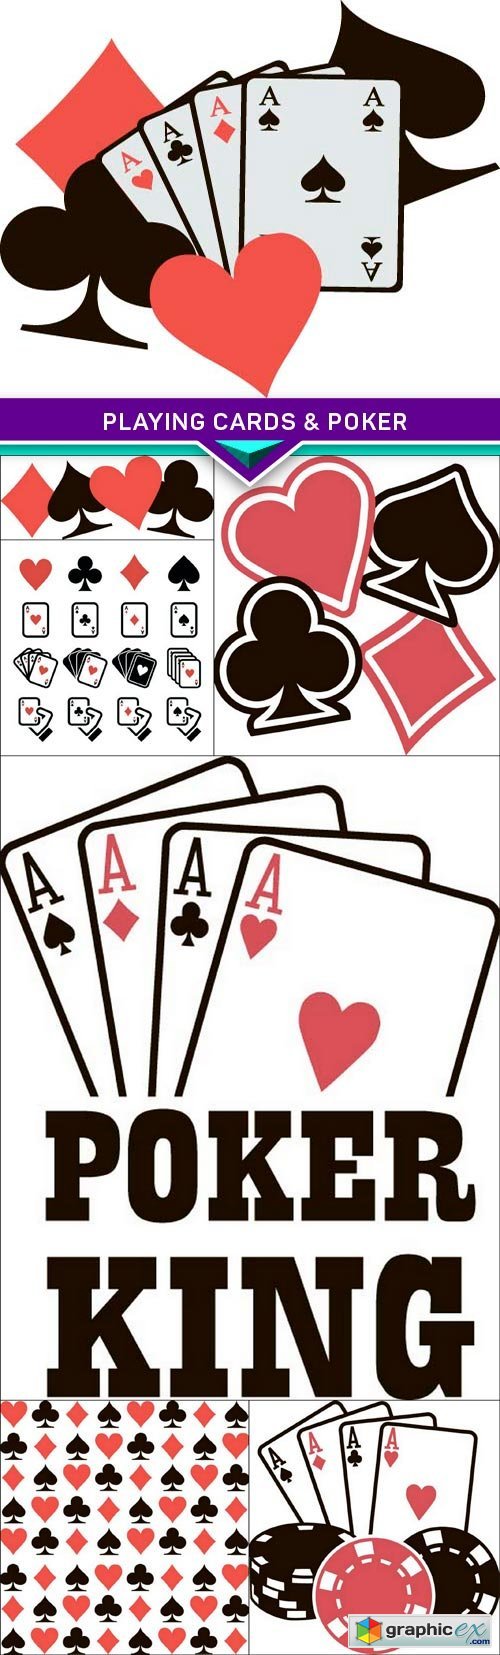 Playing cards & poker 7x EPS